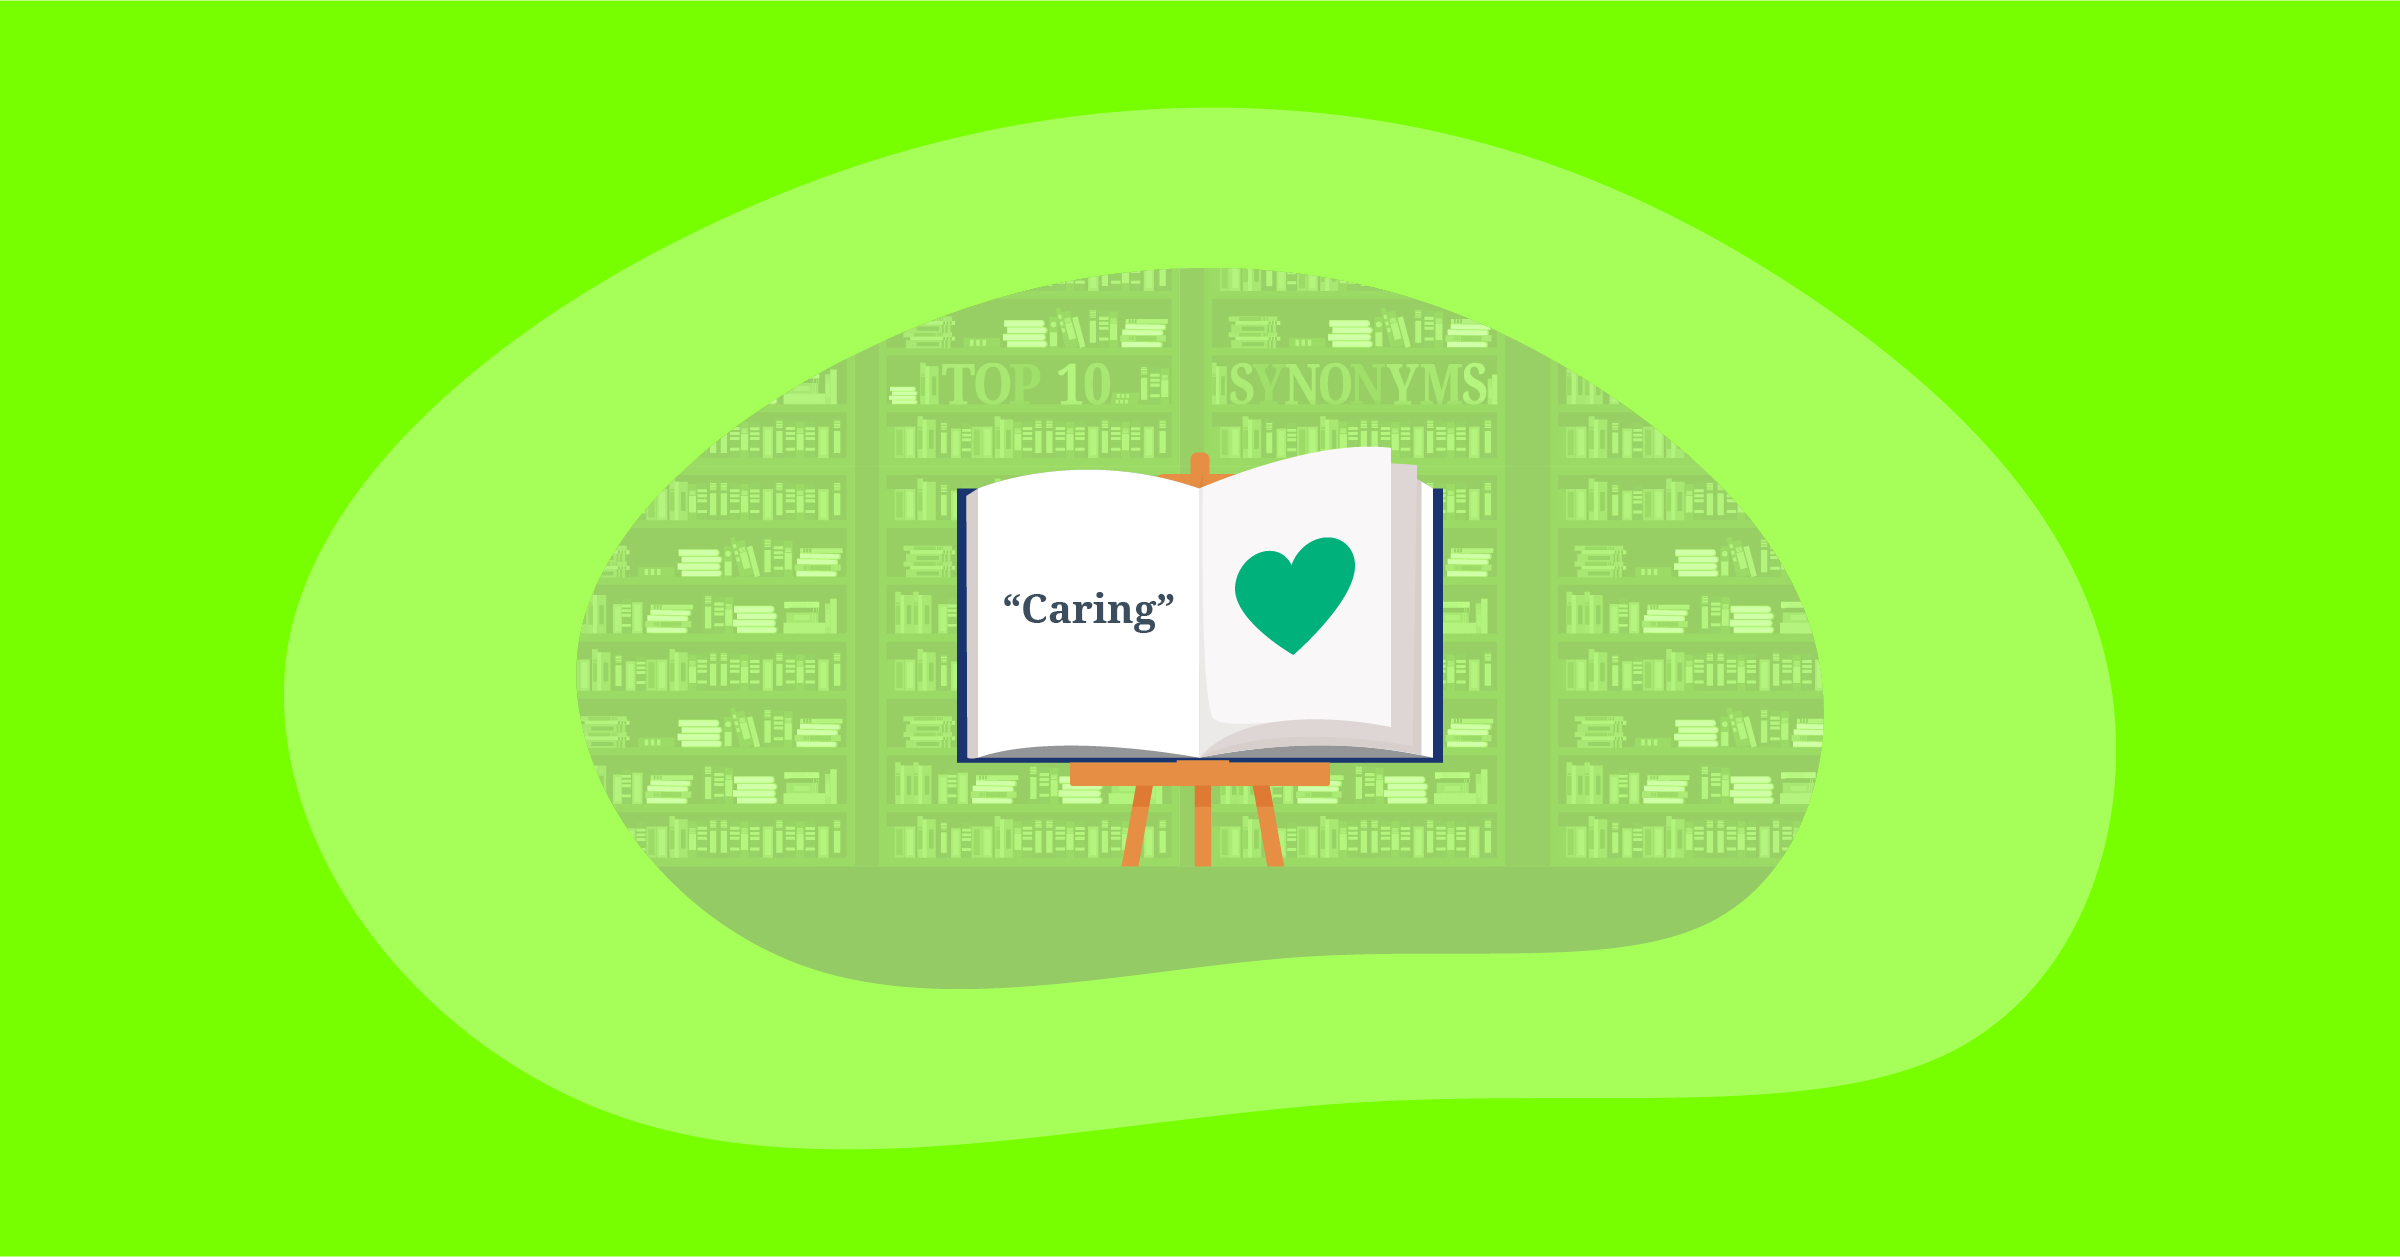 Illustration for Top 10 Positive & Impactful Synonyms for “Caring”